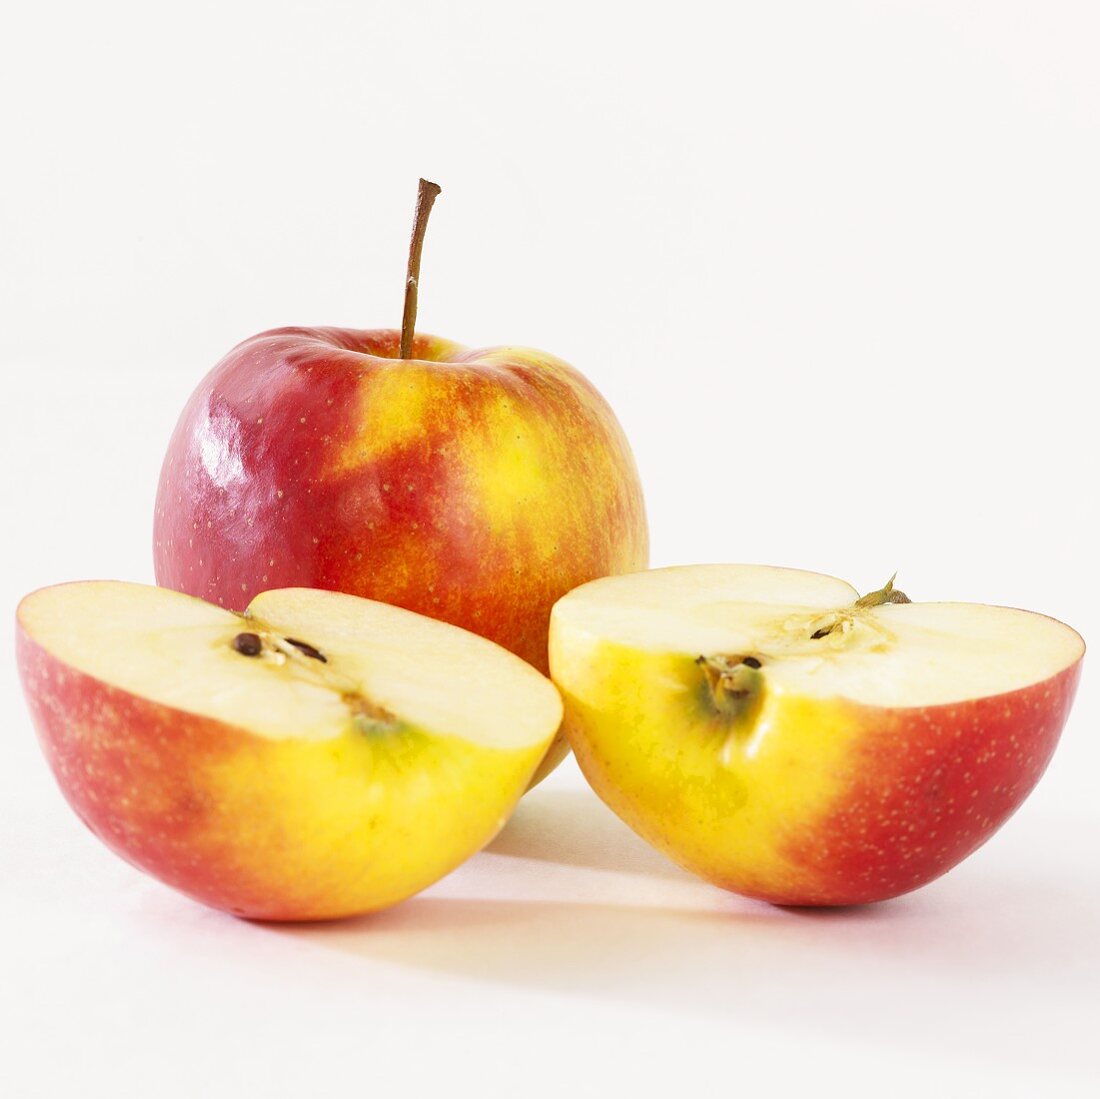 Apples, variety: Golden Delicious